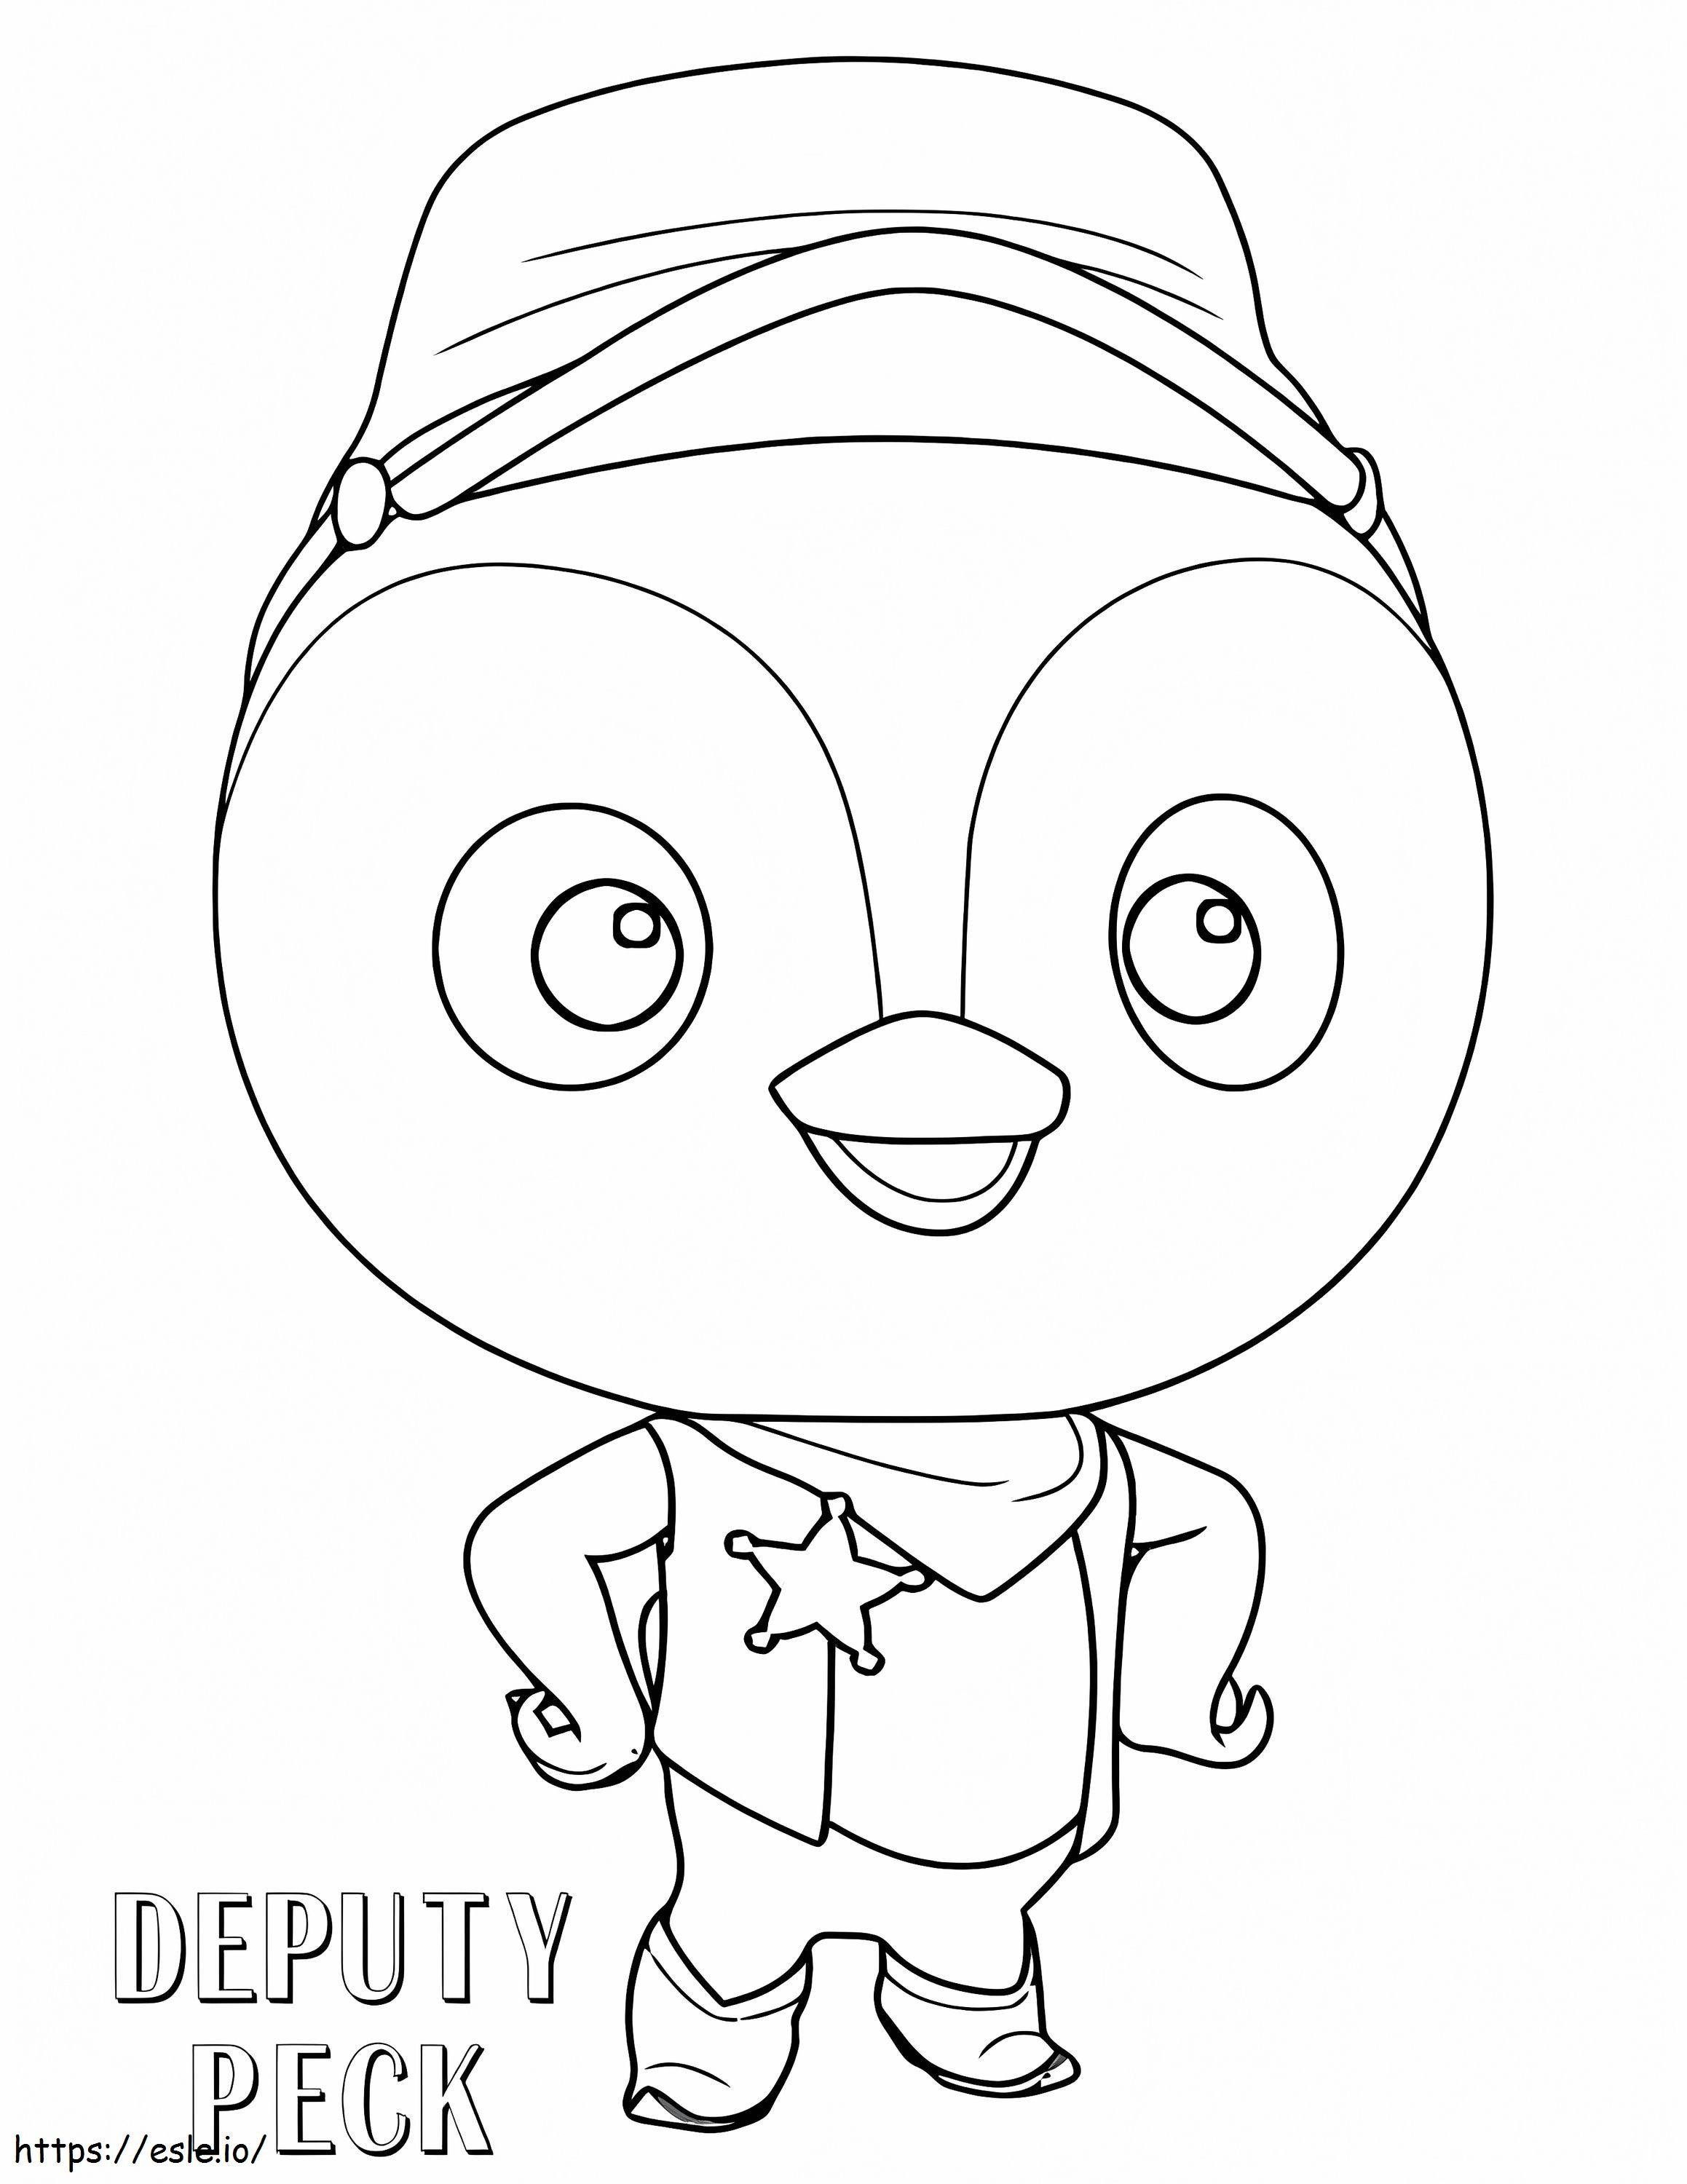 Deputy Duck coloring page